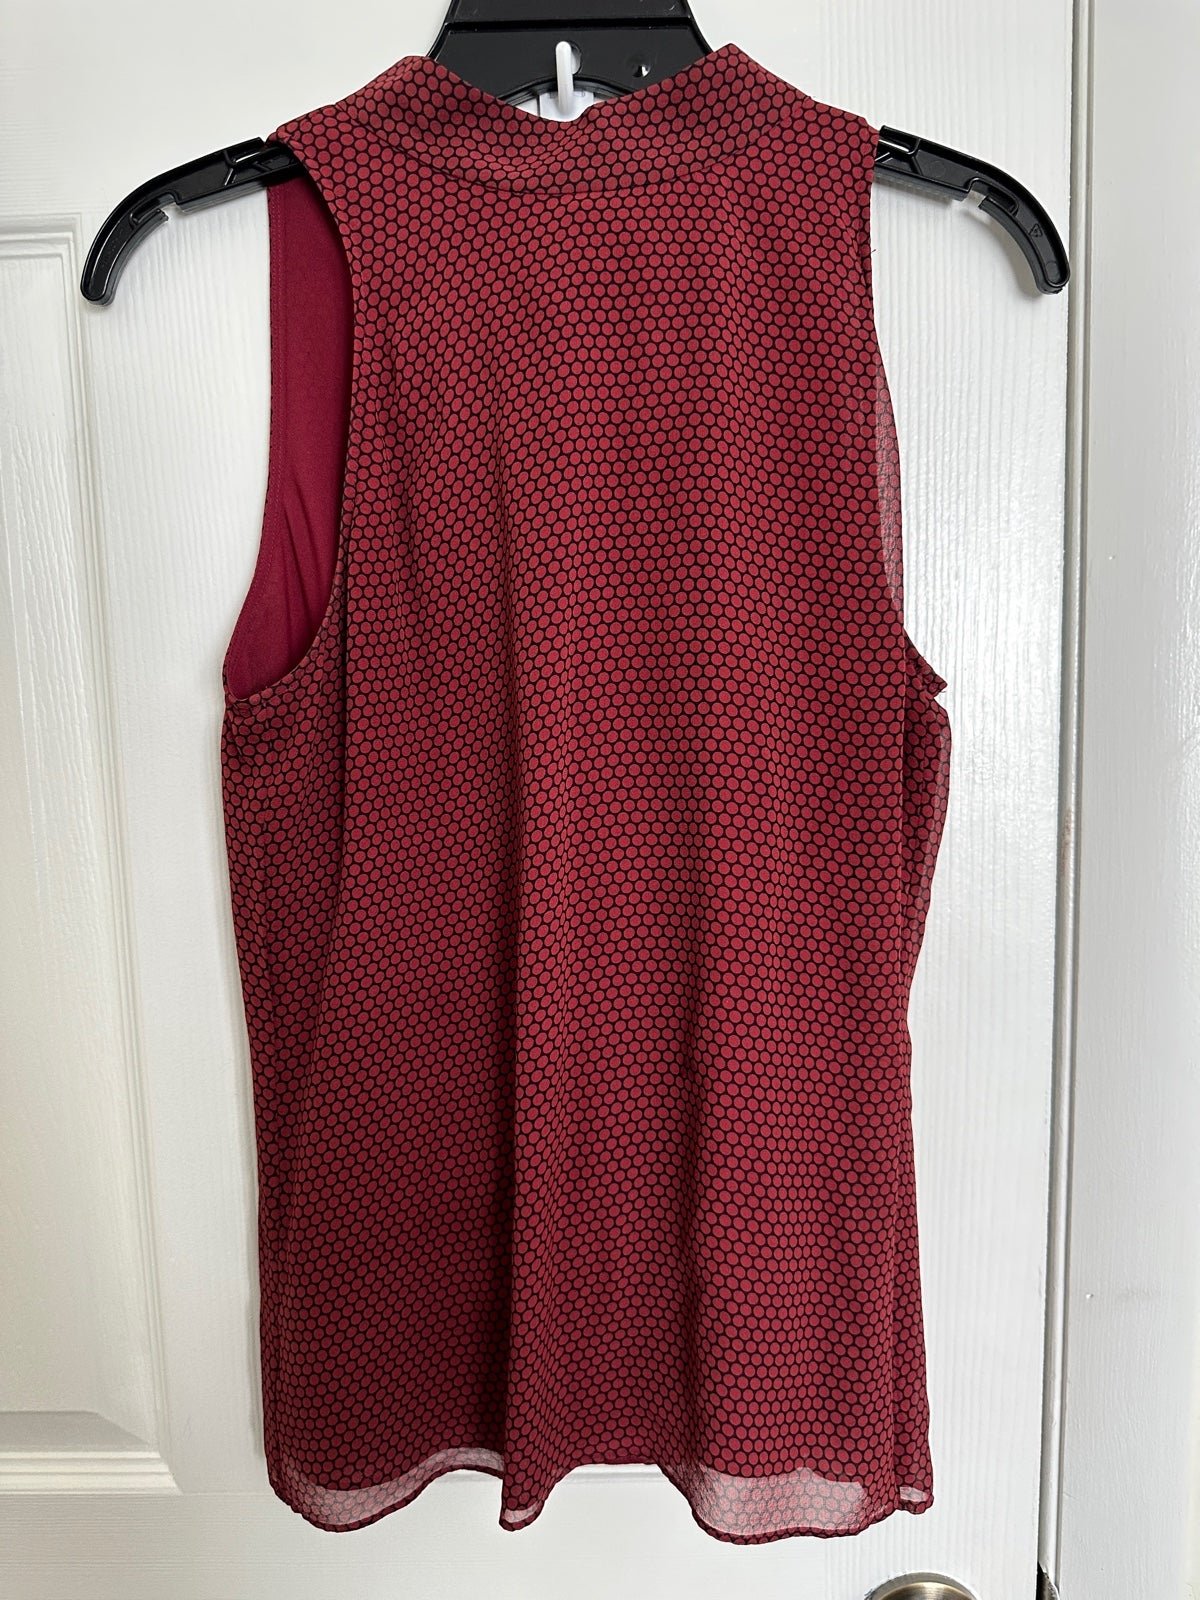 Simple Theory silk red black halter top - size Small P9